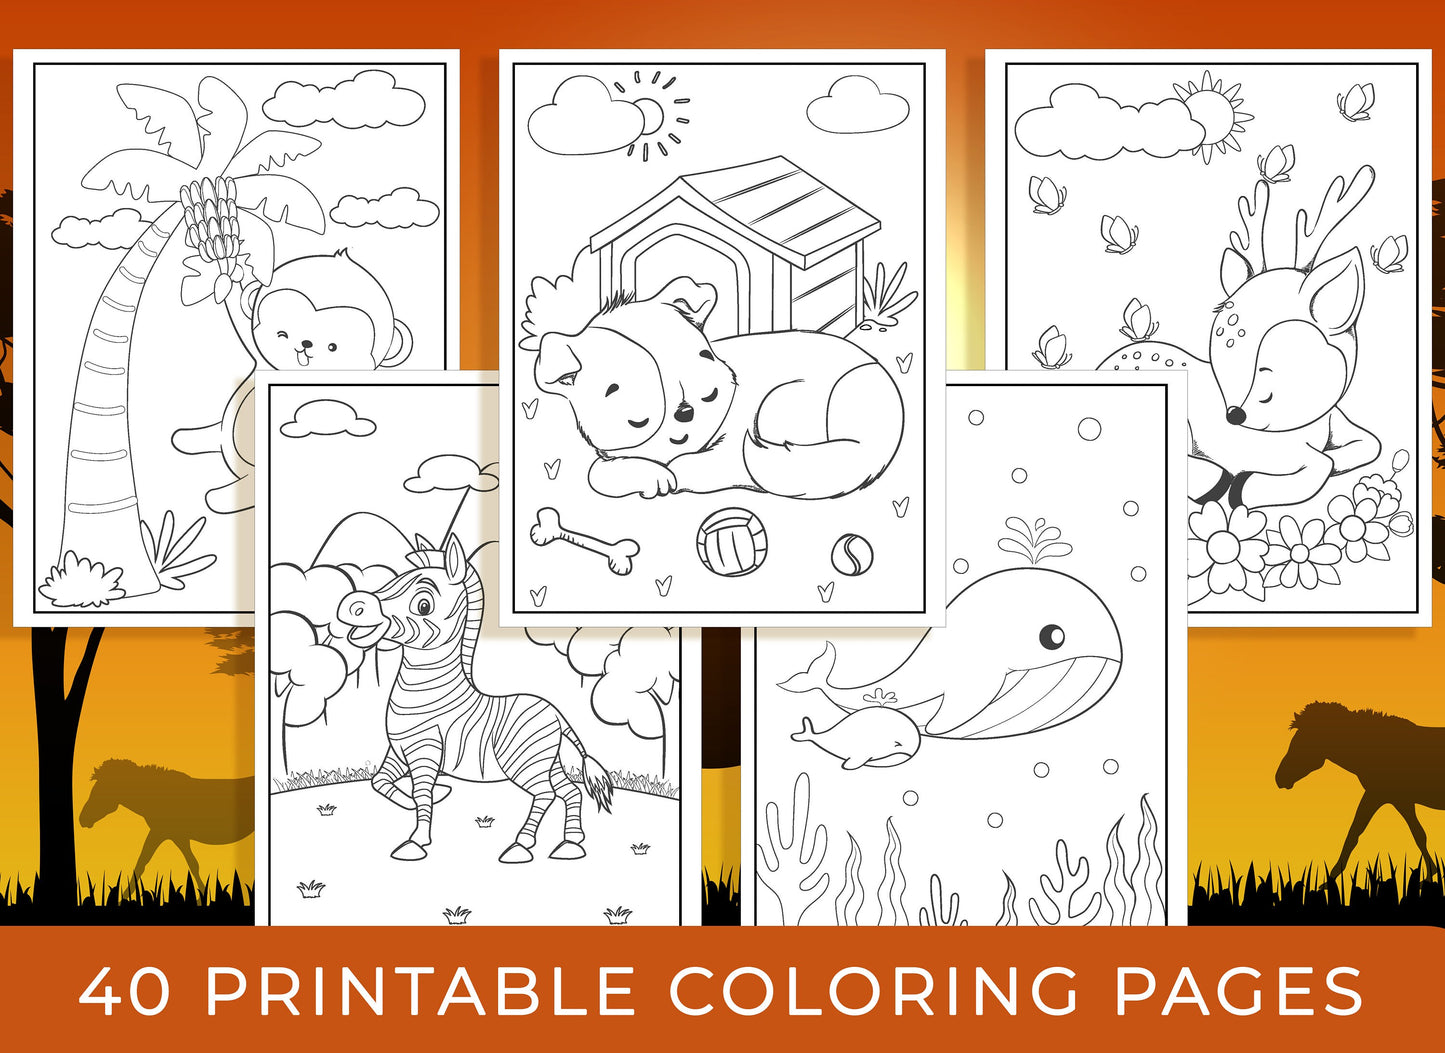 Animal Coloring Pages - 40 Printable Animal Coloring Pages for Boys, Girls, Teens, Kids, Animal Birthday Party Activity, Kids Birthday Party